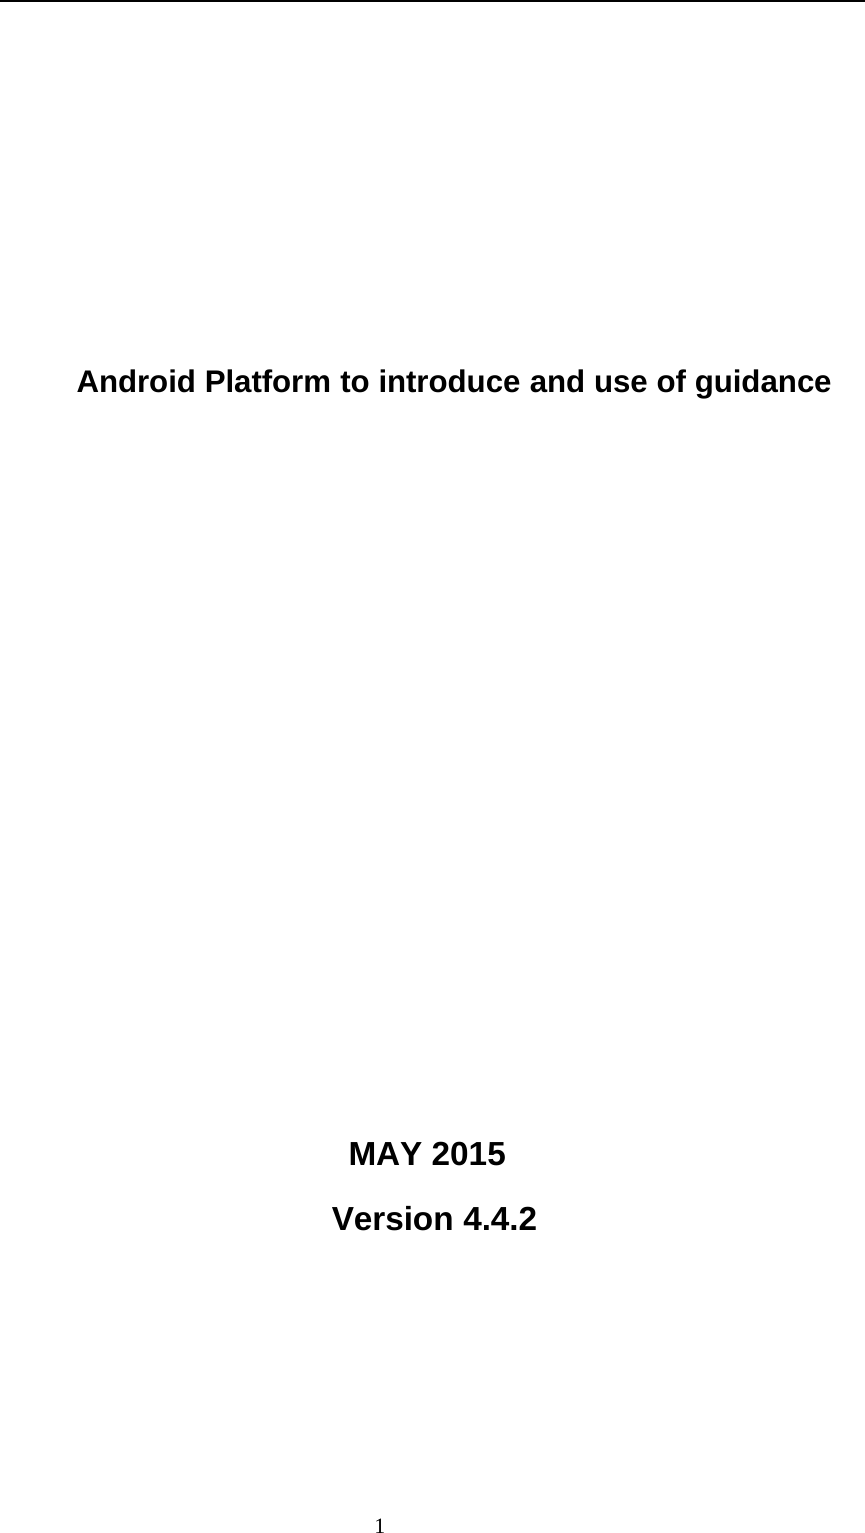 1Android Platform to introduce and use of guidanceMAY 2015Version 4.4.2